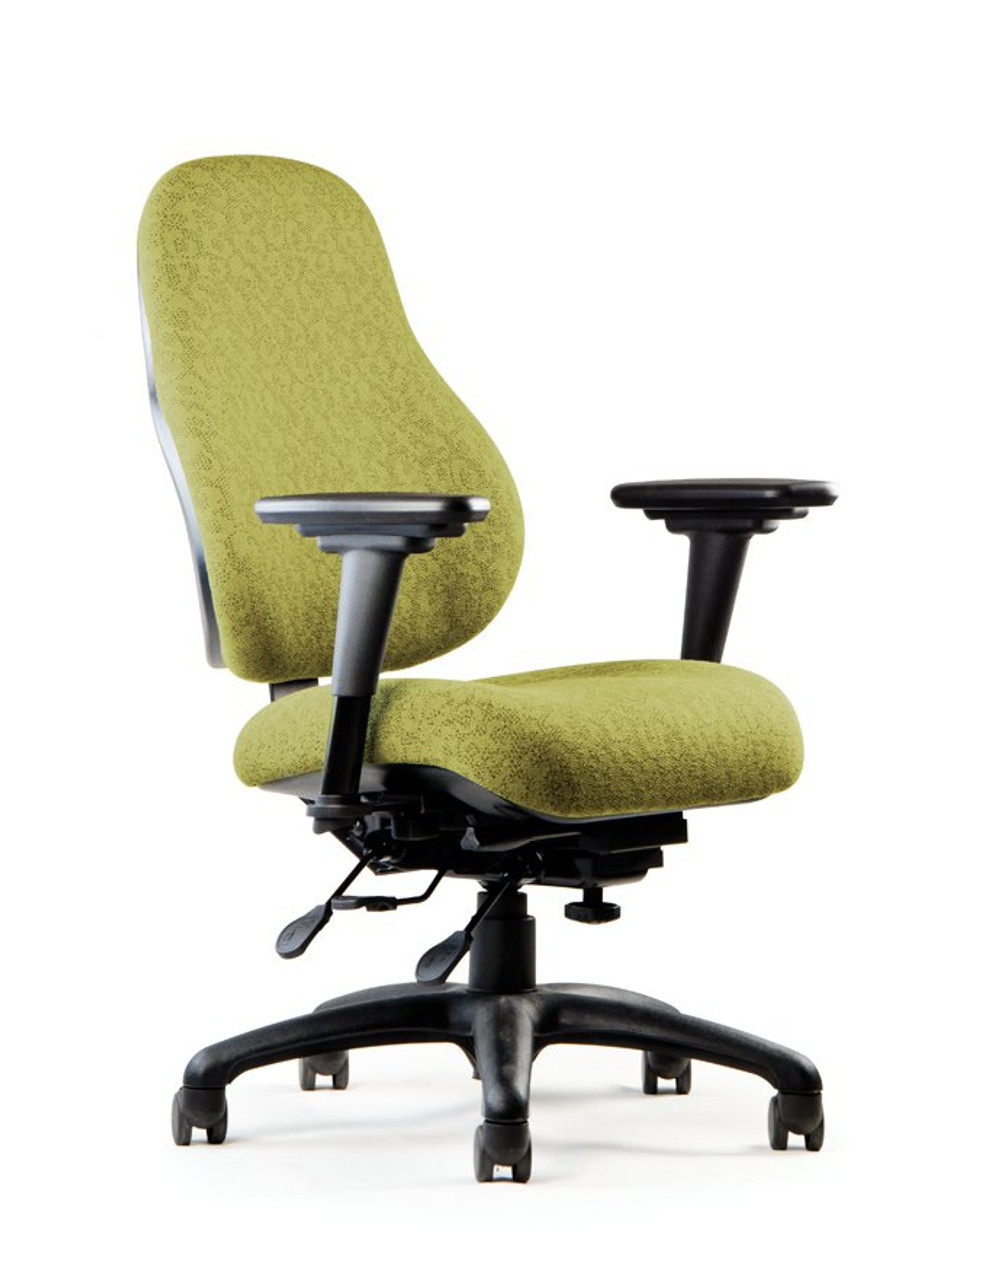 Home Office Chair, 8Hours Heavy Duty Design, Ergonomic Mid Back